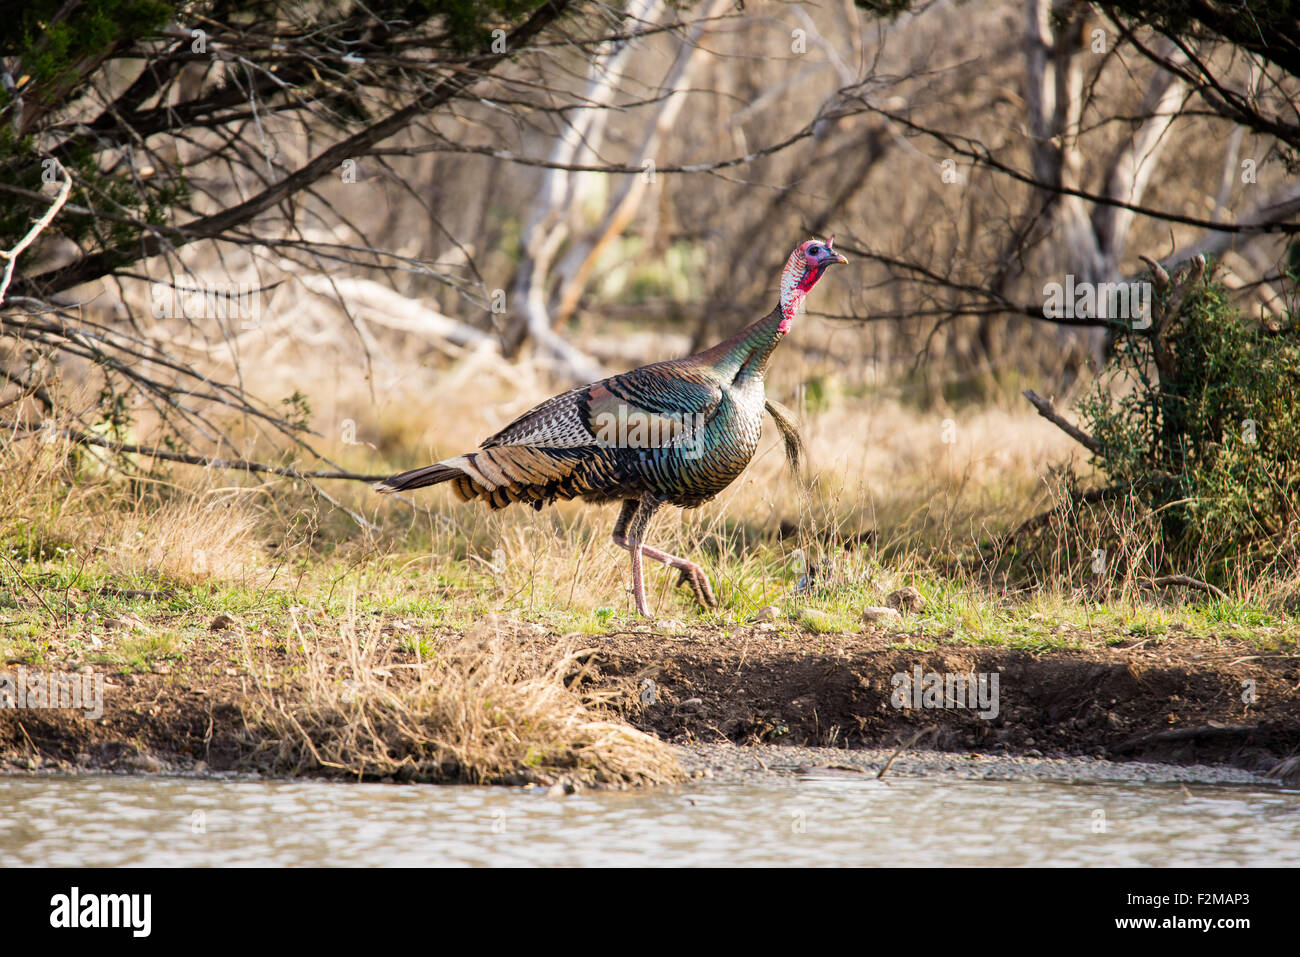 Rio Grande Wild Turkey High Resolution Stock Photography And Images Alamy